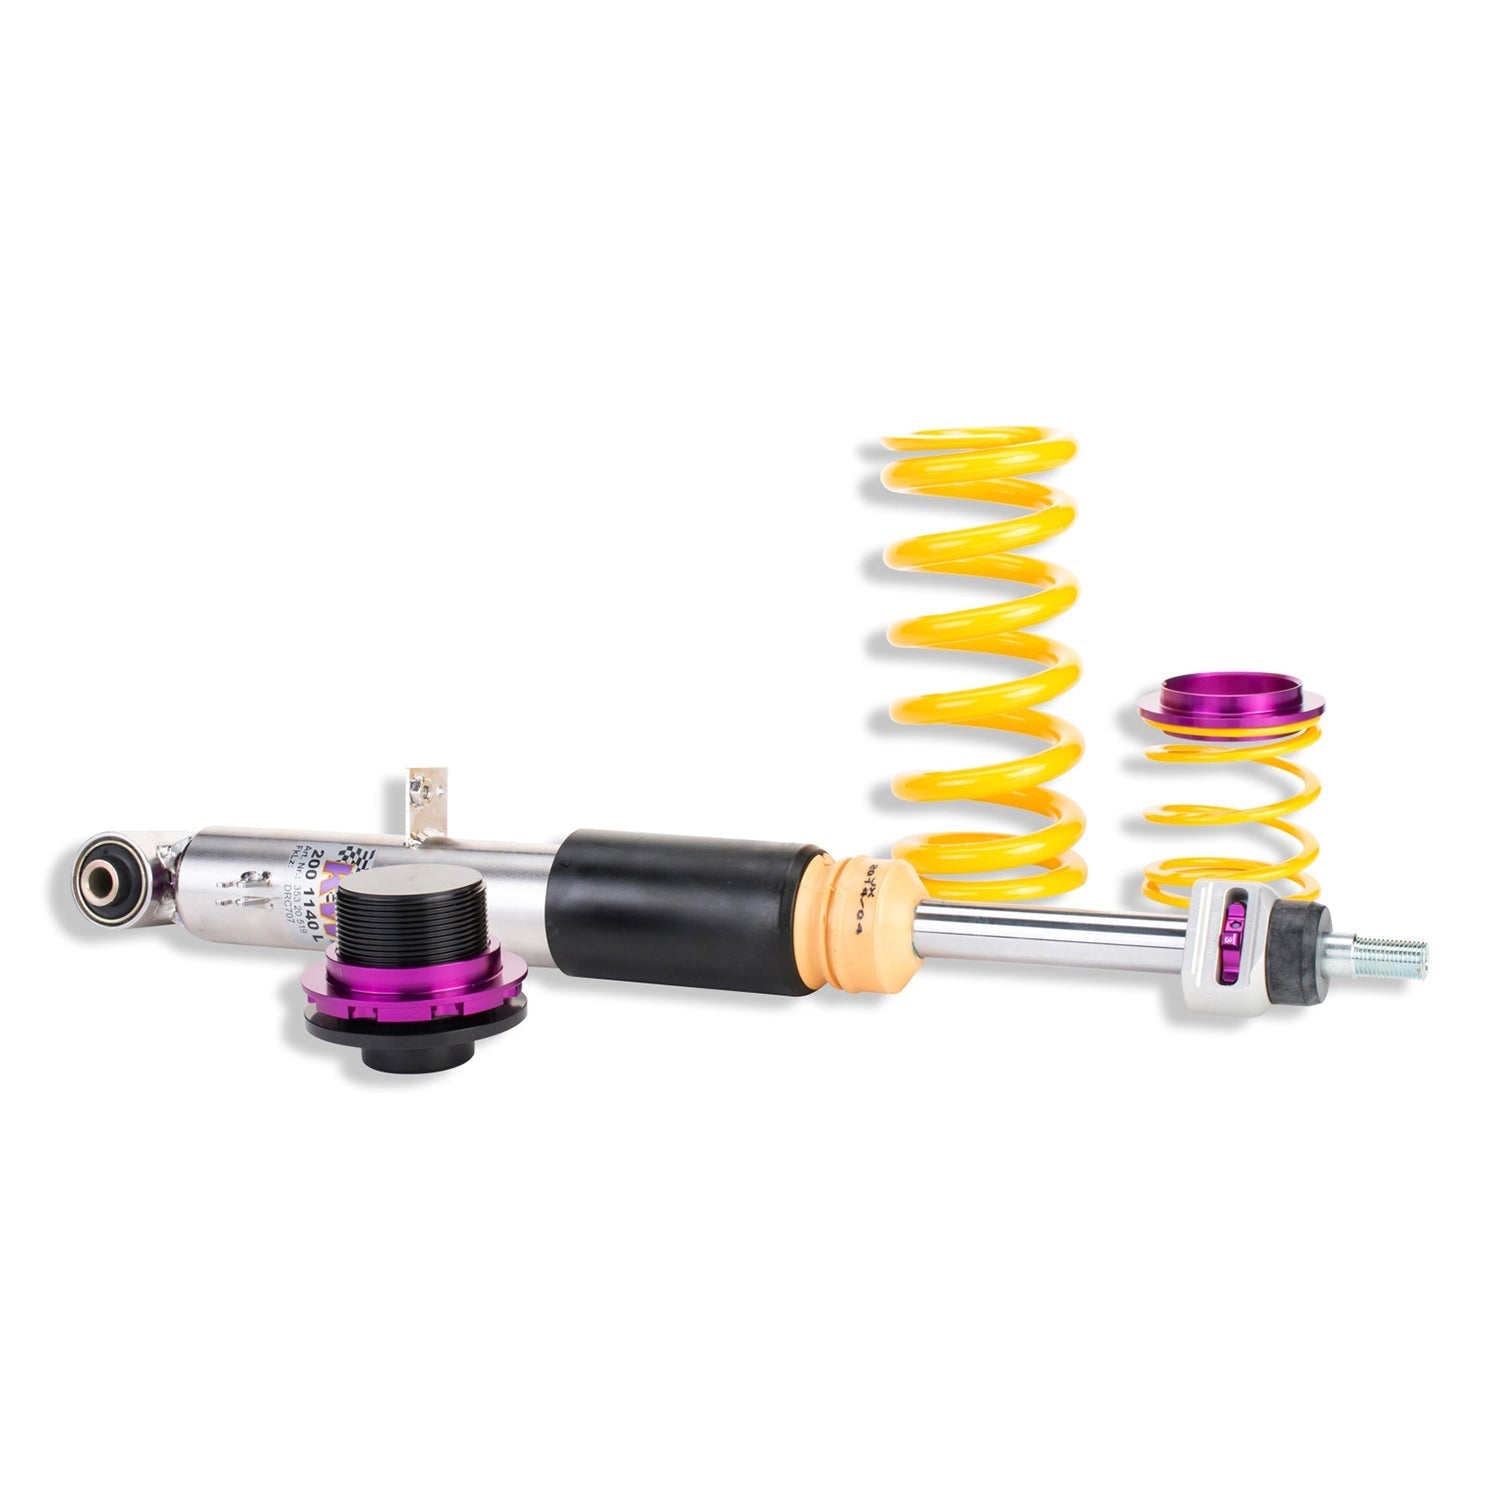 KW BMW M3/M4 V3 Coilover Kit (F80/F82) With Deactivation Kit-R44 Performance